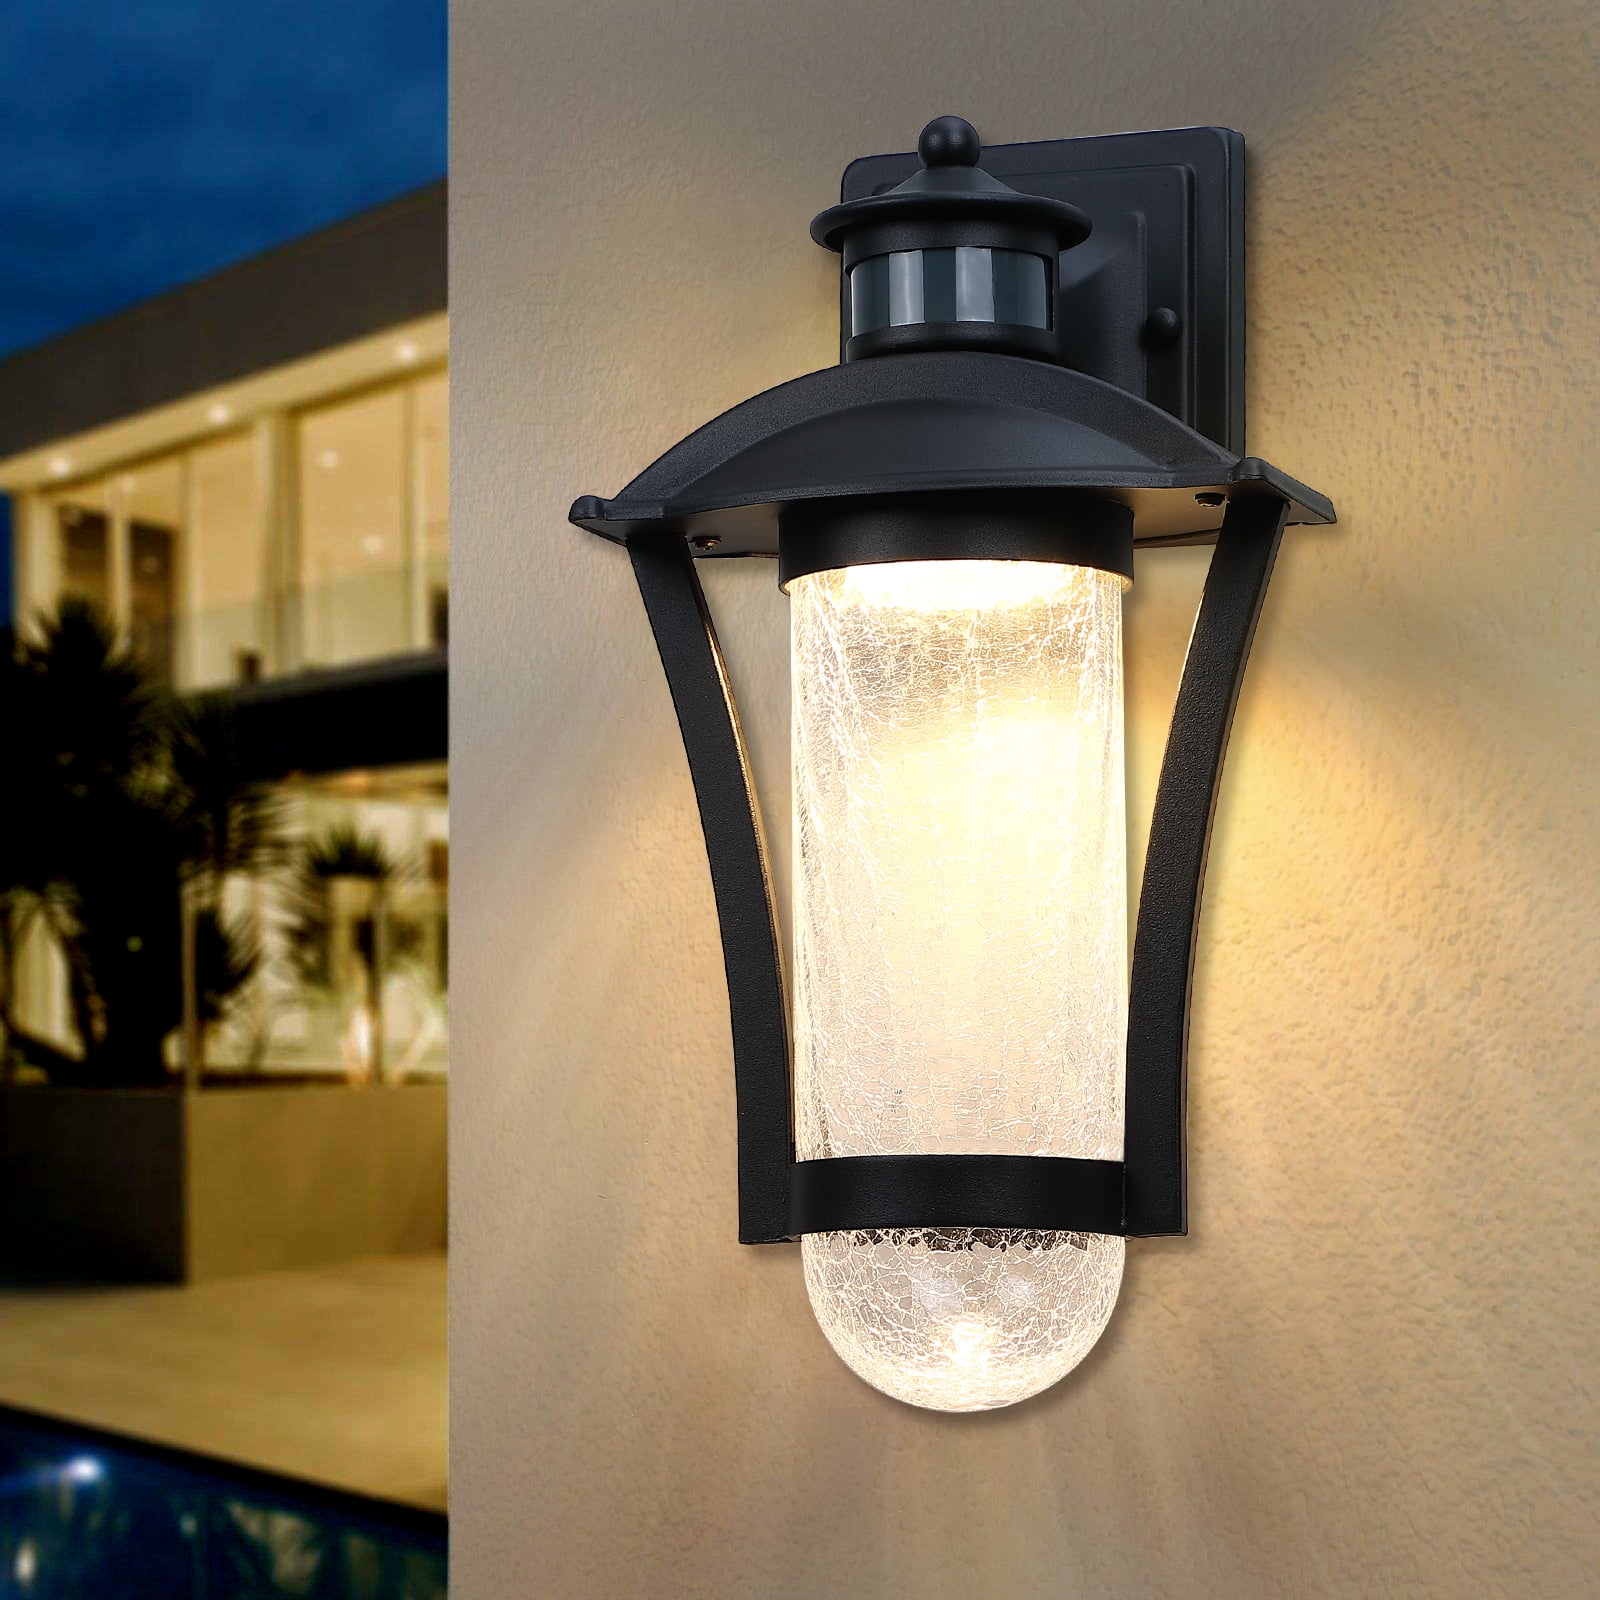 VICTOGATE Outdoor Wall Lights Dusk to Dawn Outdoor Motion Sensor Black Porch Lights for House, Front Porch LED Outdoor Light Fixtures Wall Exterior Wall Sconce for Entryway Garage - Walmart.com